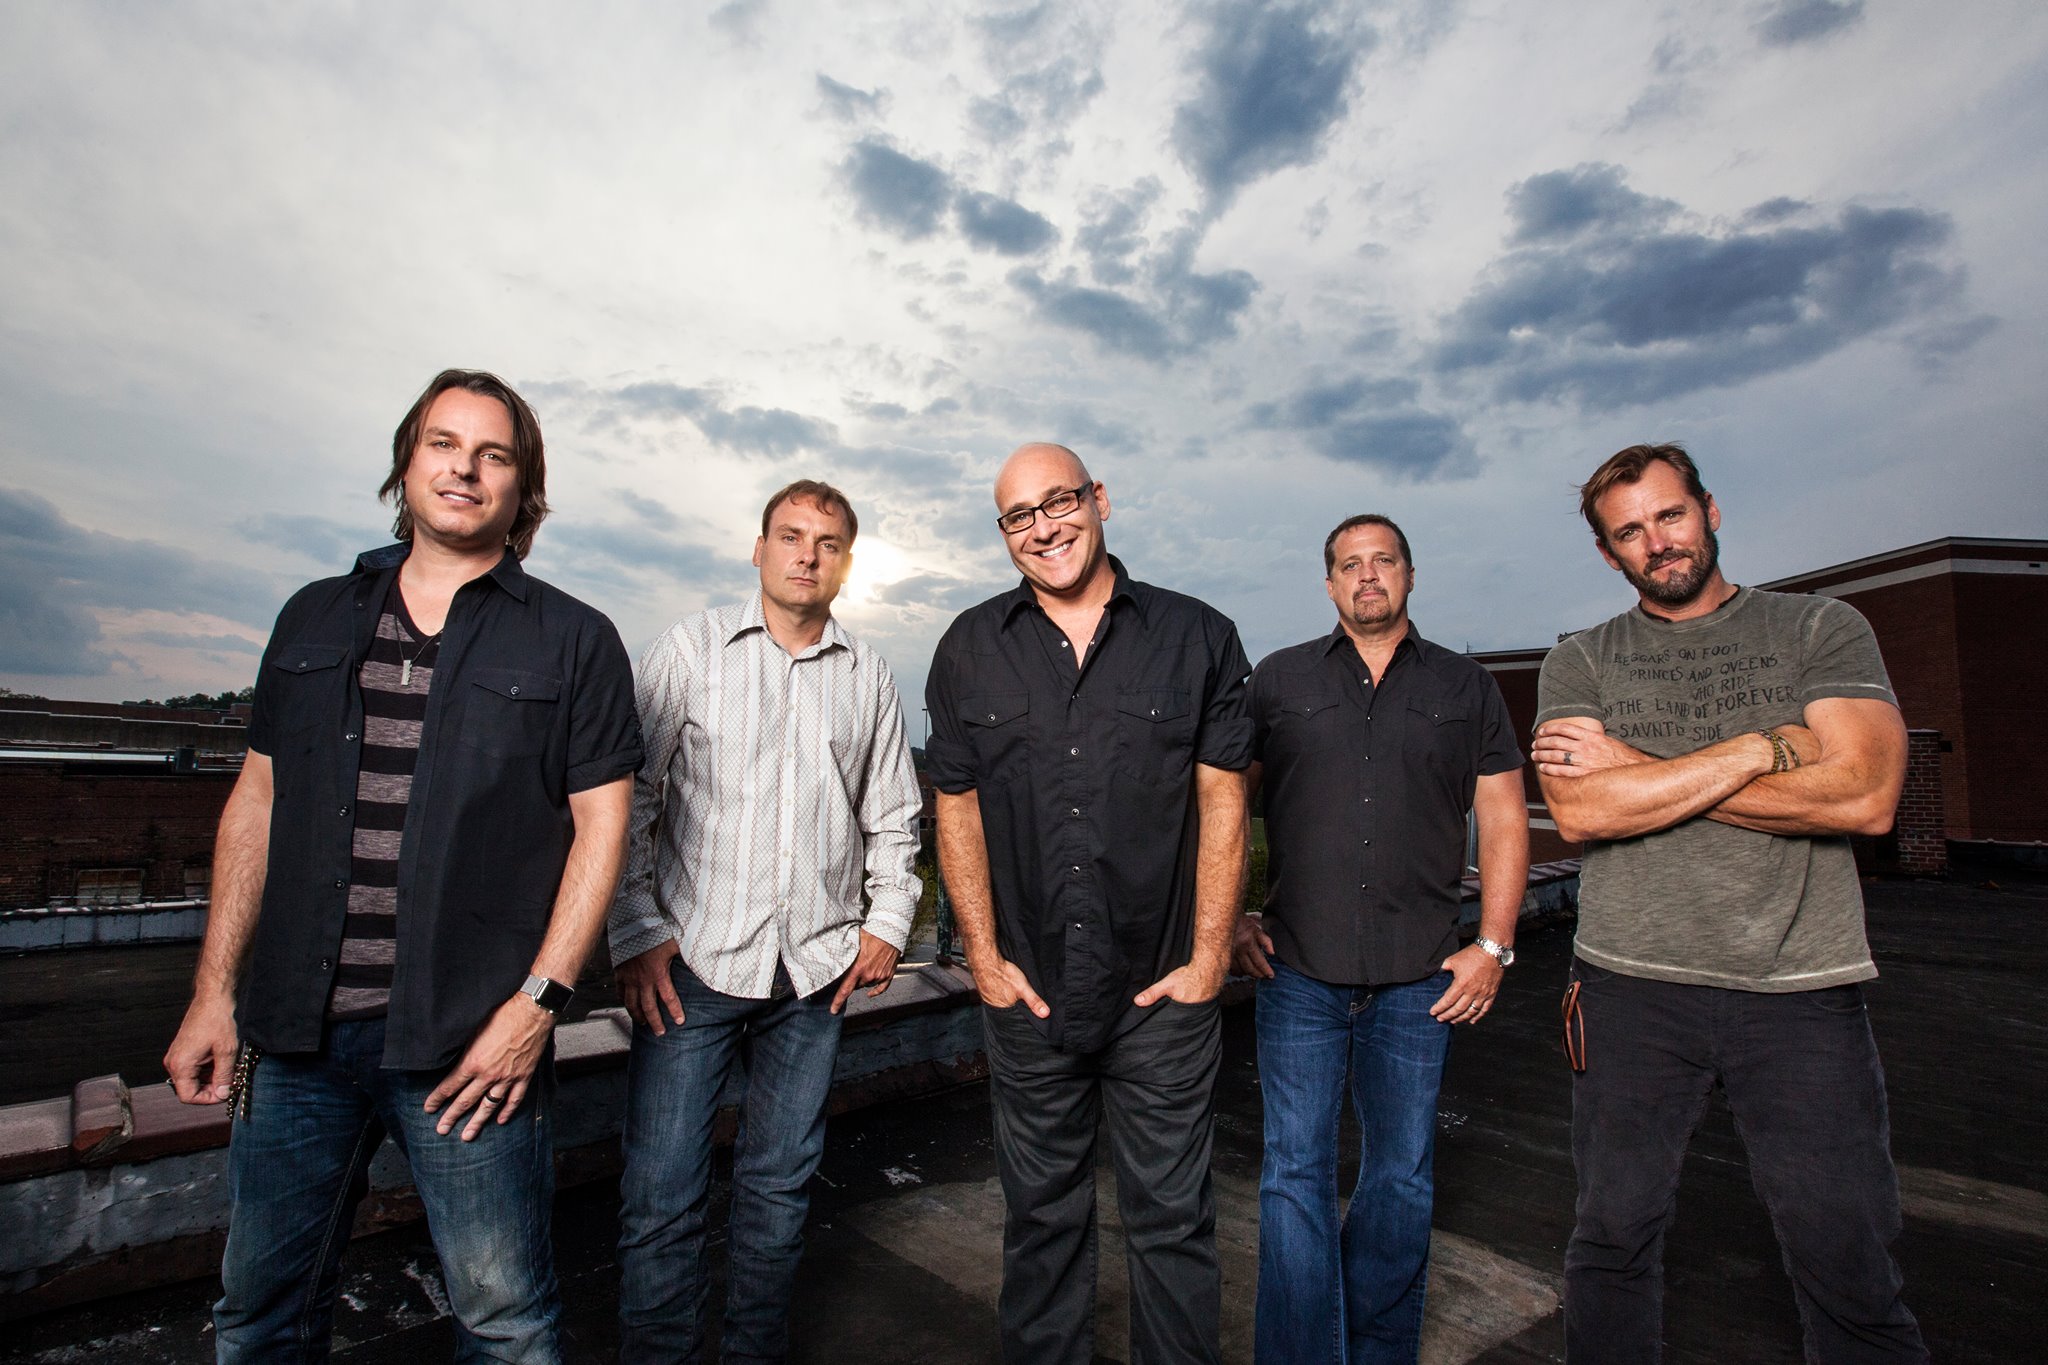 The Rock Revival presents Sister Hazel at Downtown Alive on July 19